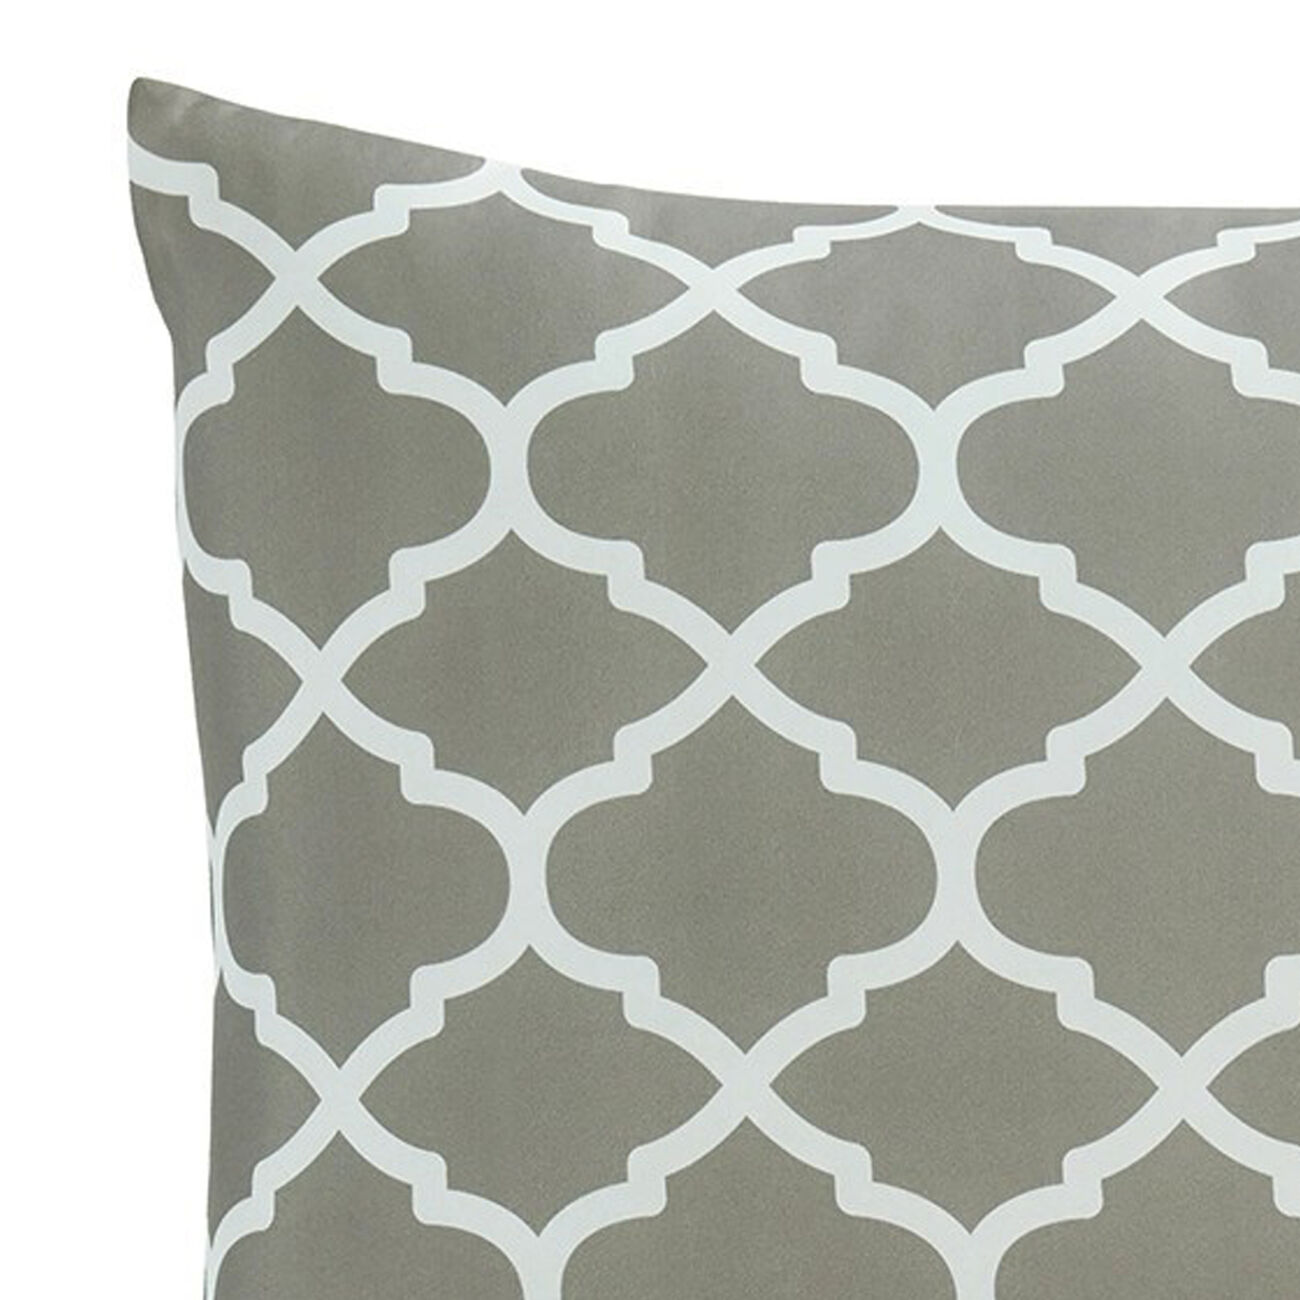 2 Piece Twin Comforter Set with Quatrefoil Design, Gray and White